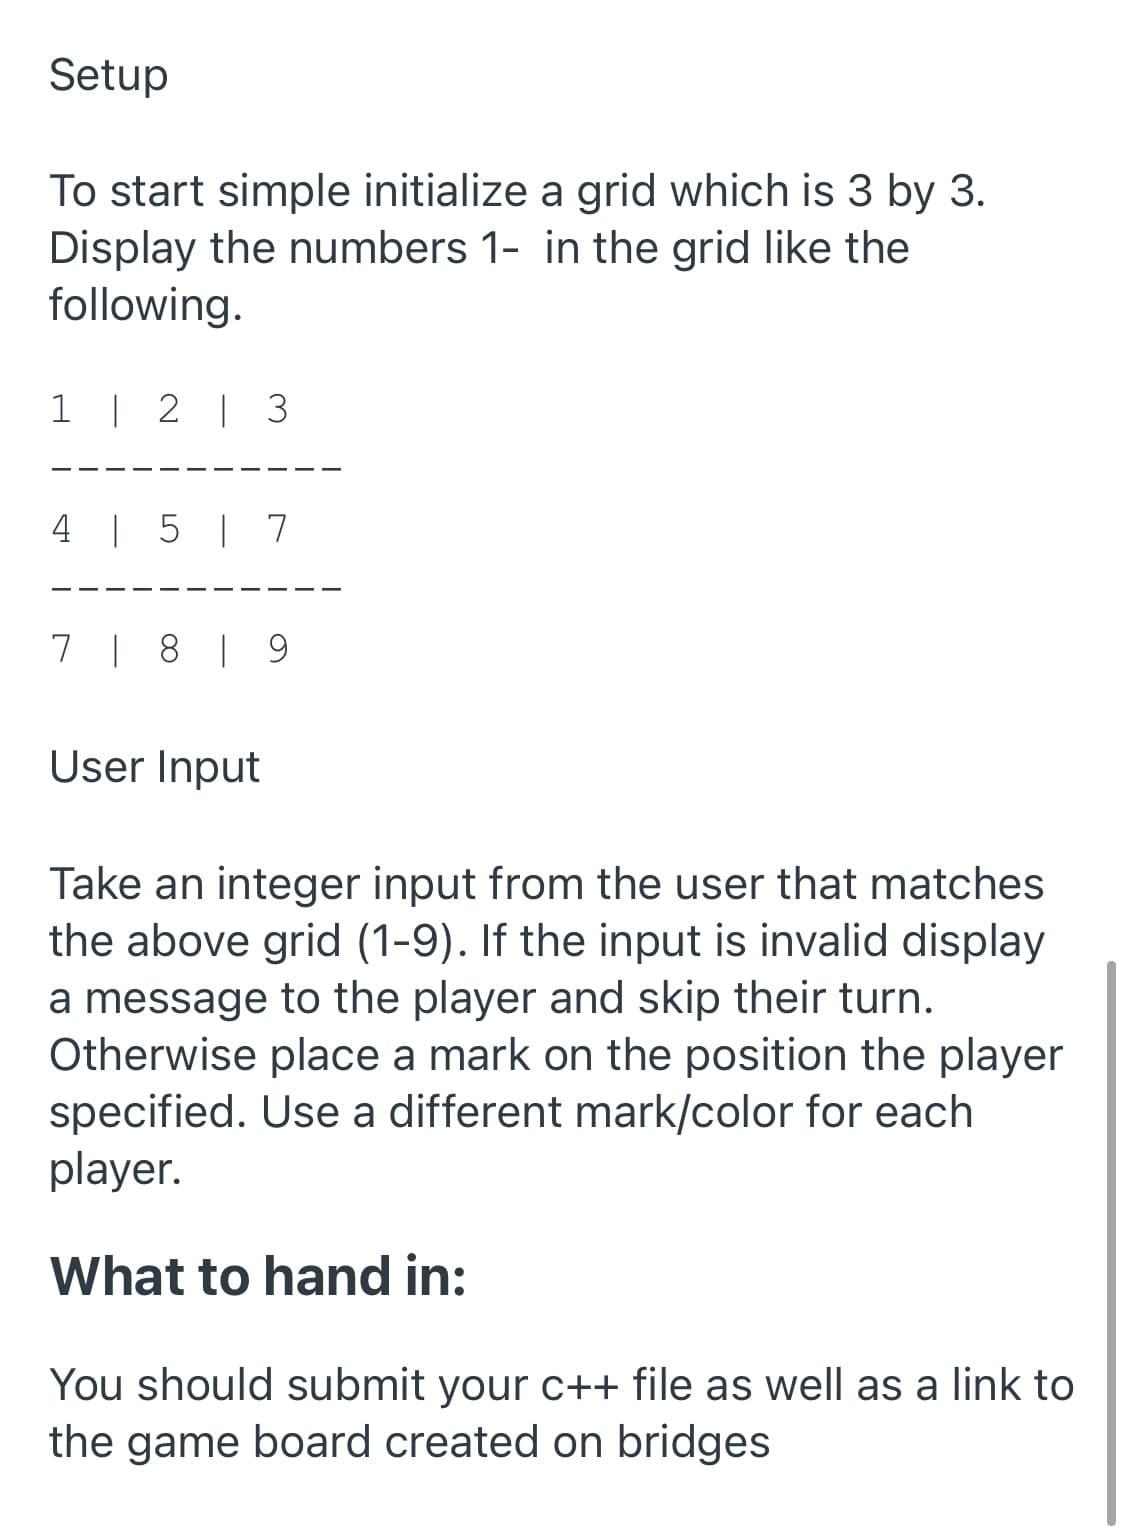 Setup
To start simple initialize a grid which is 3 by 3.
Display the numbers 1- in the grid like the
following.
1 | 2 | 3
4 | 5 | 7
7 | 8 | 9
User Input
Take an integer input from the user that matches
the above grid (1-9). If the input is invalid display
a message to the player and skip their turn.
Otherwise place a mark on the position the player
specified. Use a different mark/color for each
player.
What to hand in:
You should submit your c++ file as well as a link to
the game board created on bridges
